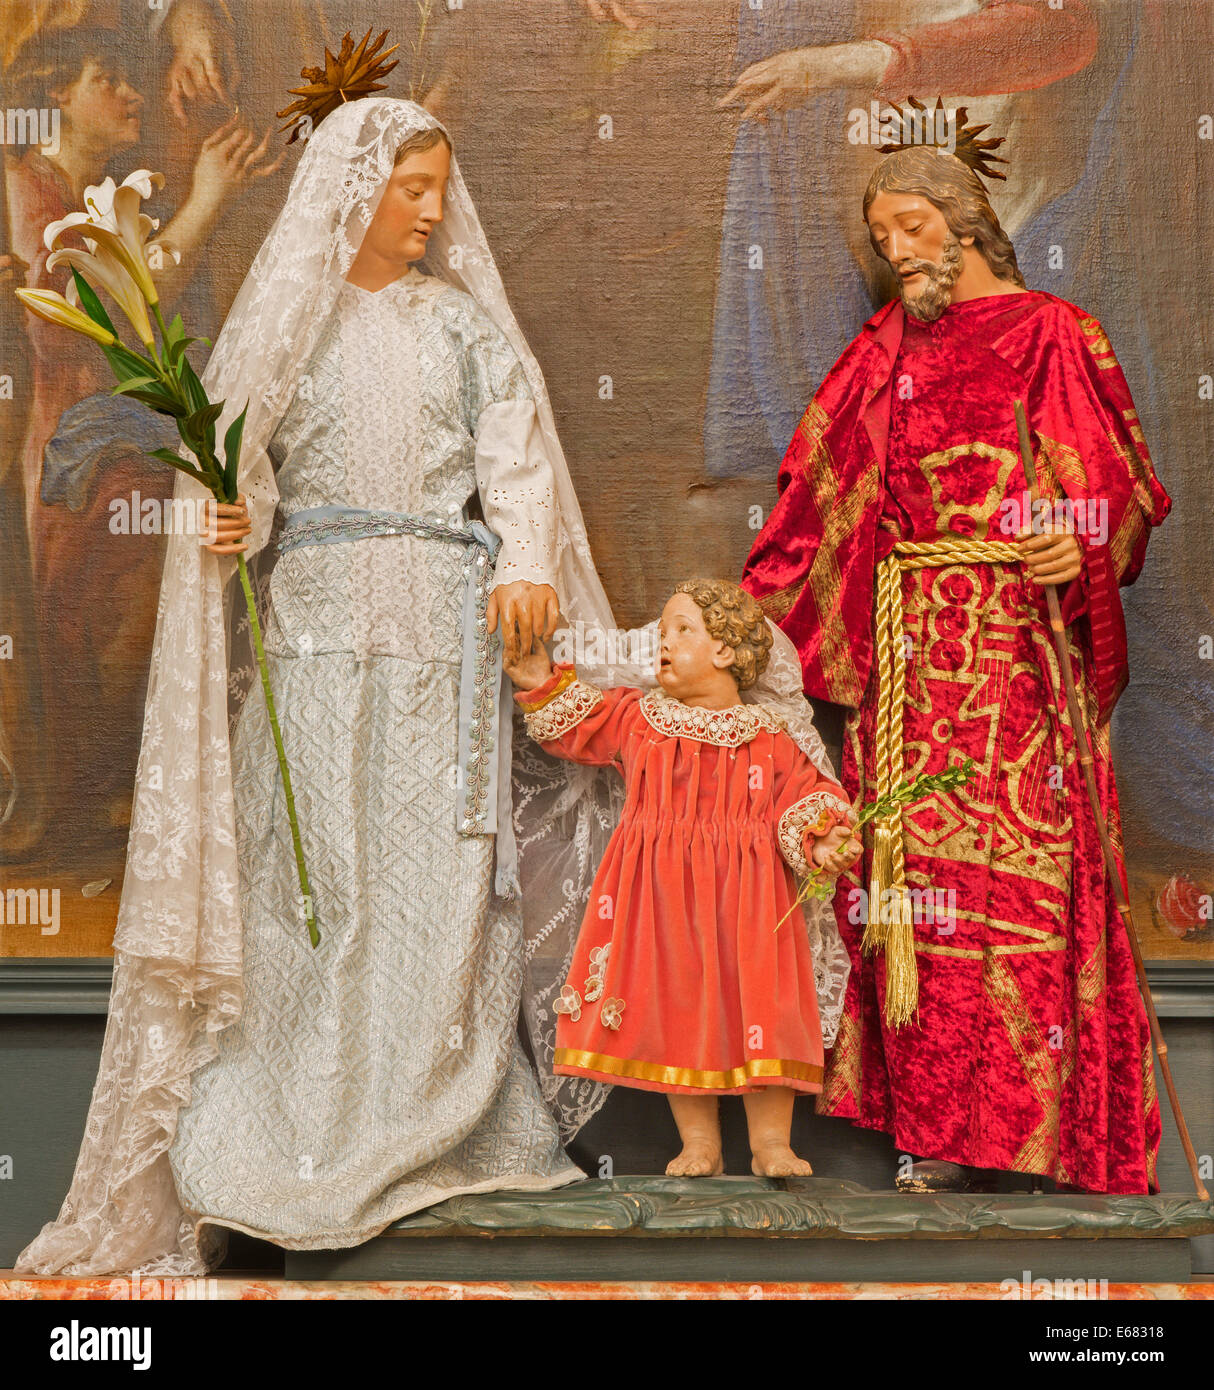 BRUSSELS, BELGIUM - JUNE 16, 2014: The Holy family in the dress in church Eglise de St Jean et St Etienne aux Minimes. Stock Photo